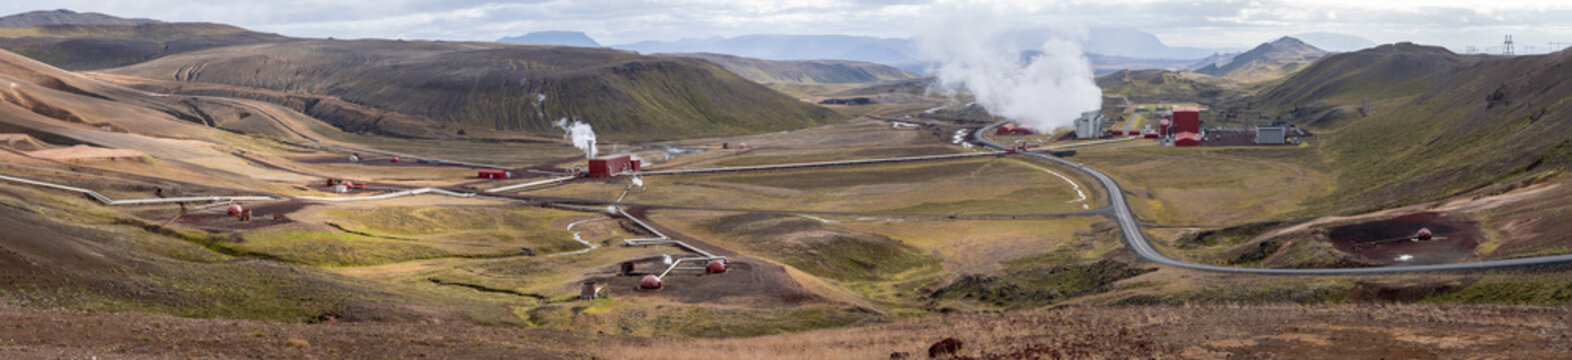 Steaming cooling tower at Krafla geothermal power plant, Iceland's power station Iceland, Scandinavia